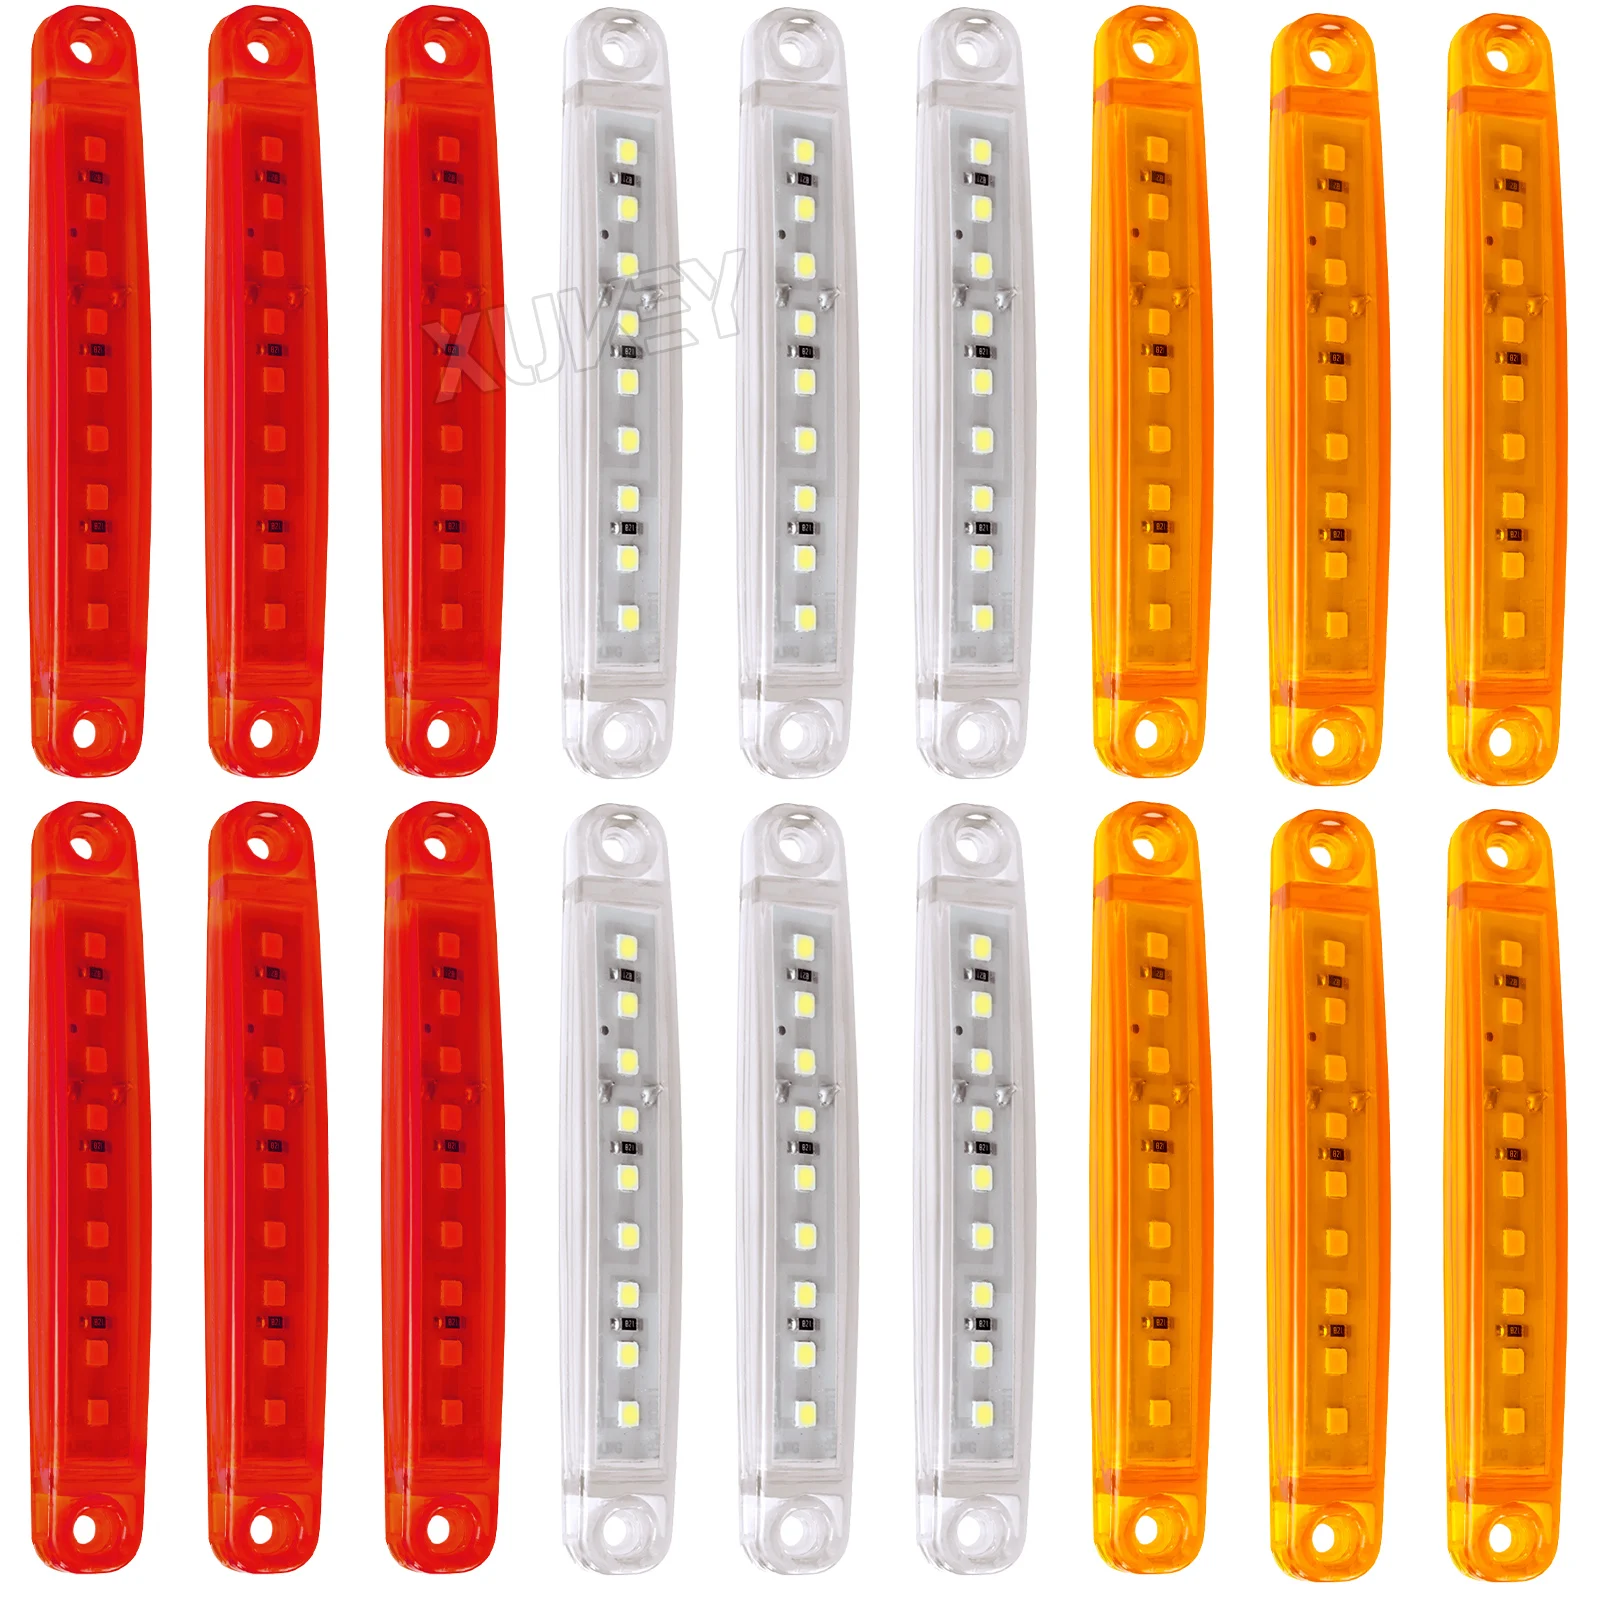 6pcs Truck Side Position Marker Light LED Clearance Lamp 12V Truck Parts Accessories for Tractor Transporters Lorry BUS Caravans